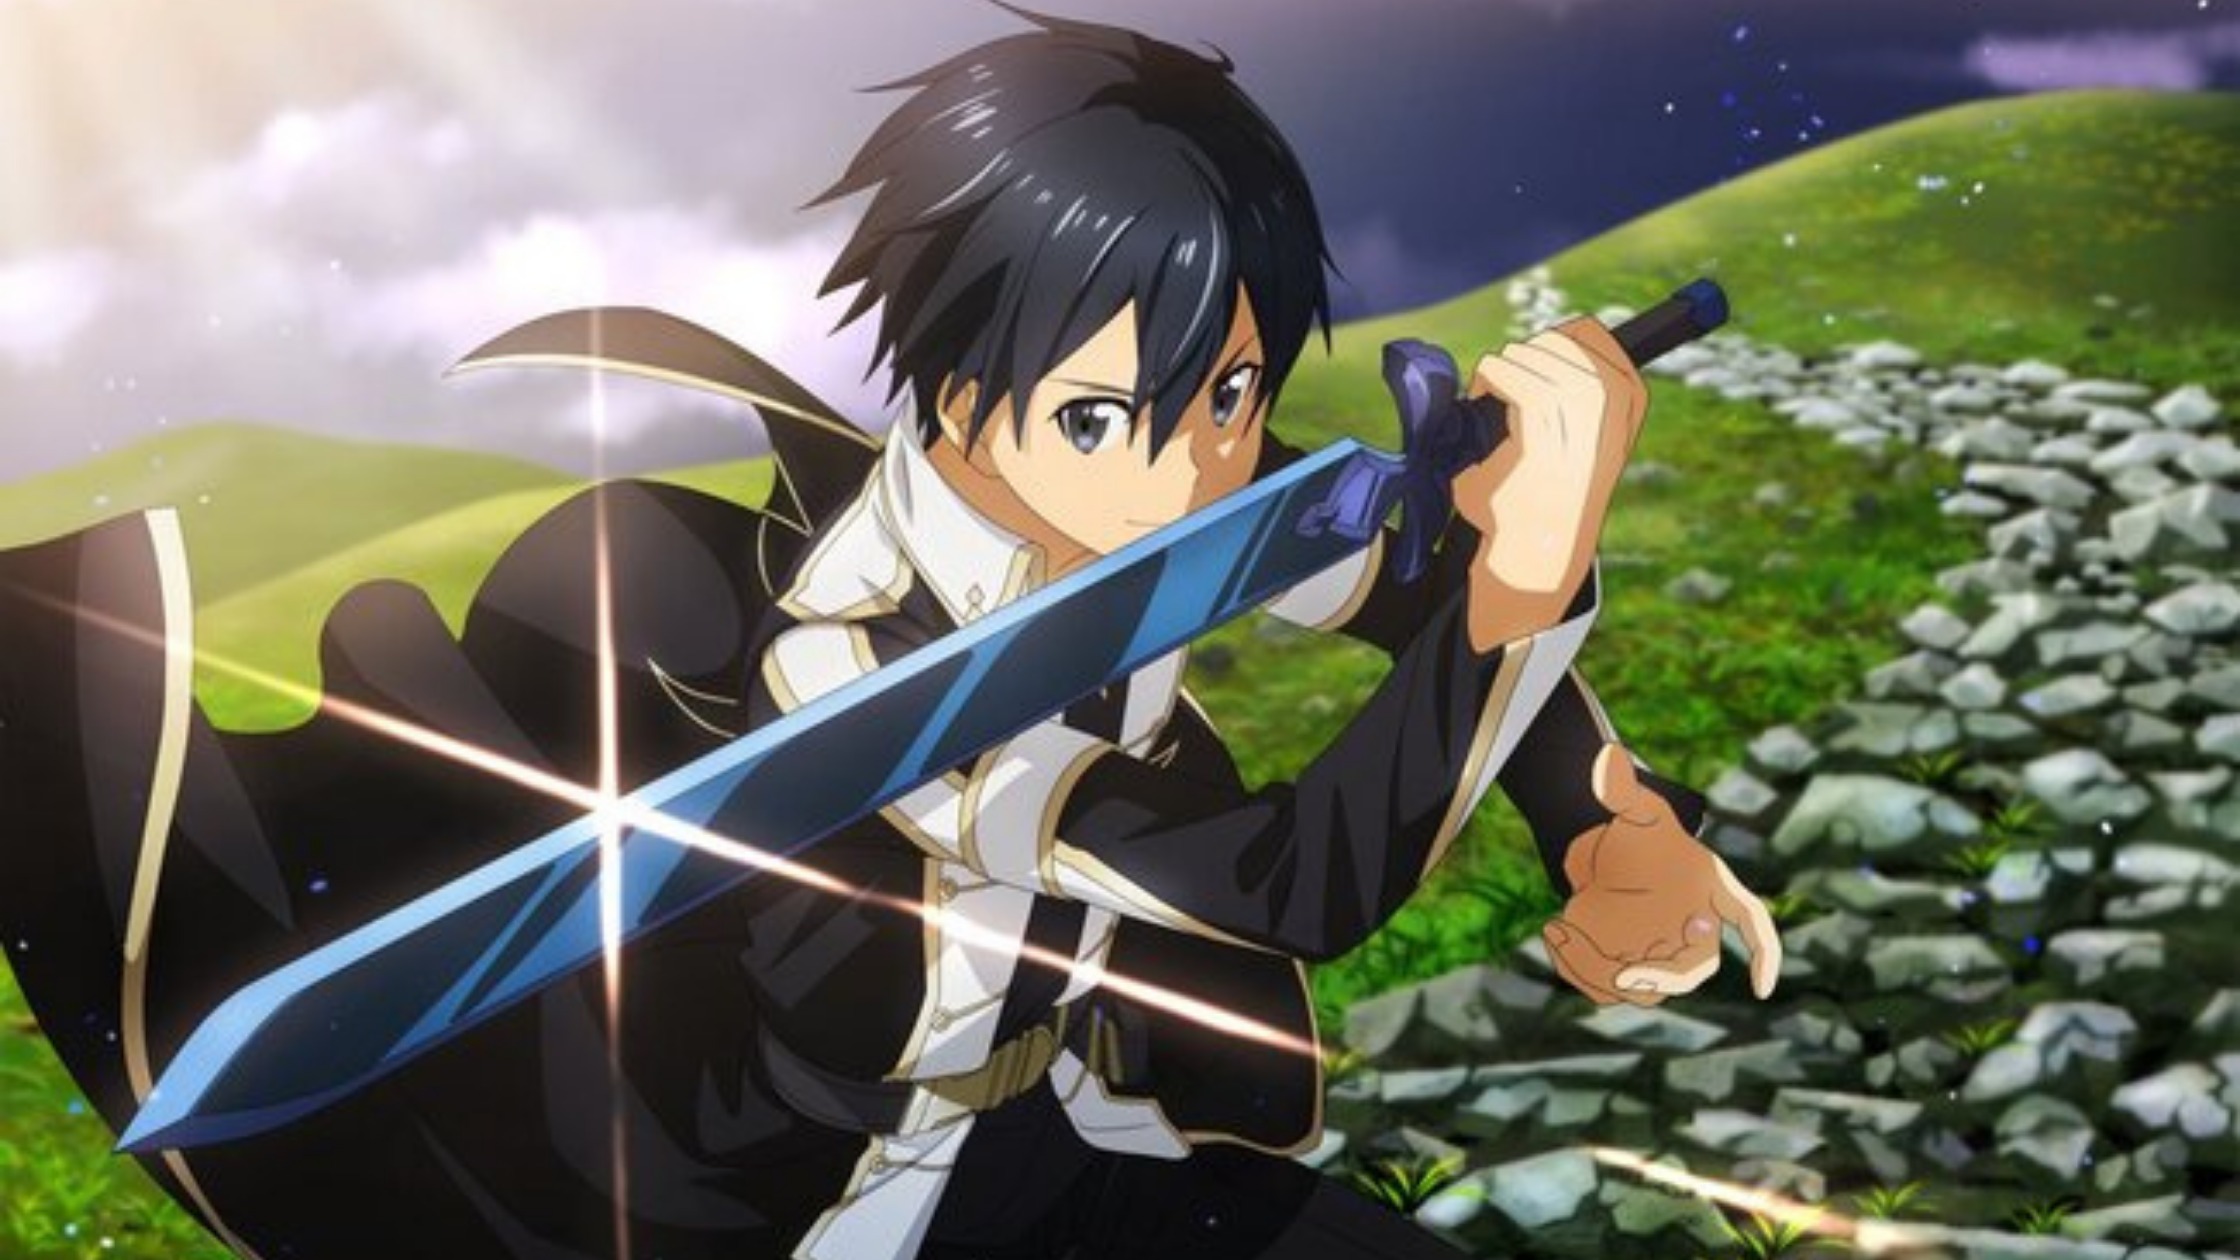 Is Kirito The Strongest Character In Sword Art Online What Makes Kirito This Powerful And Strong 